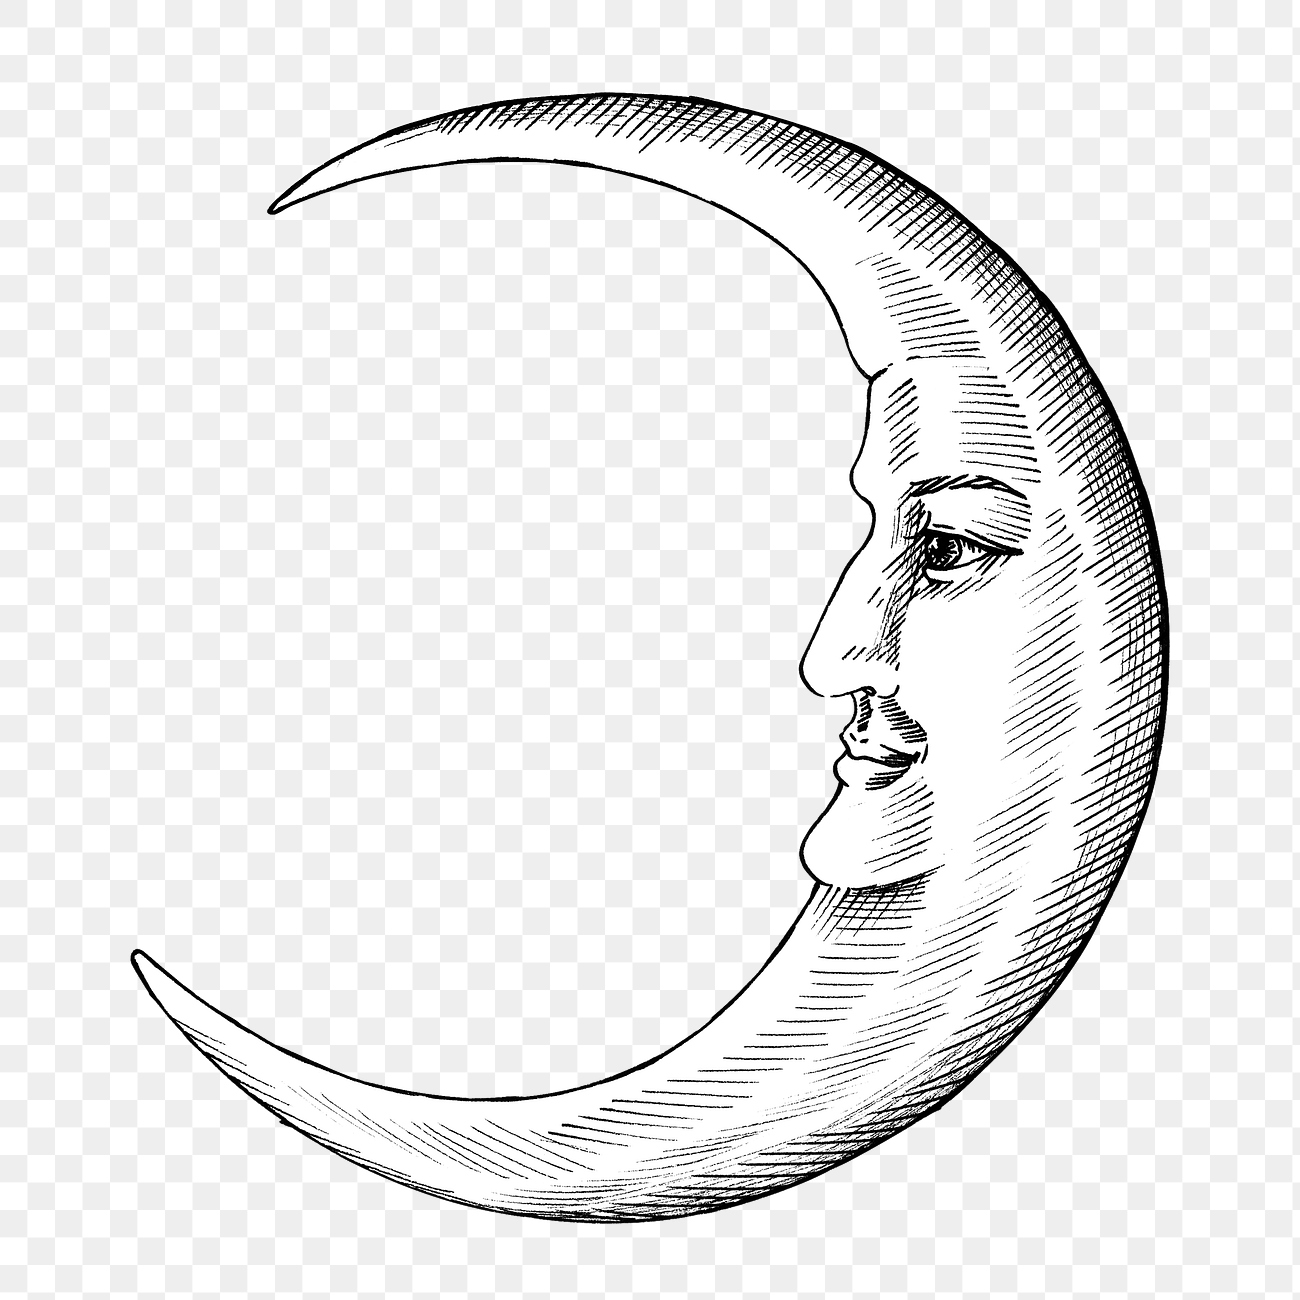 Hand drawn crescent moon with face Free PNG Sticker rawpixel